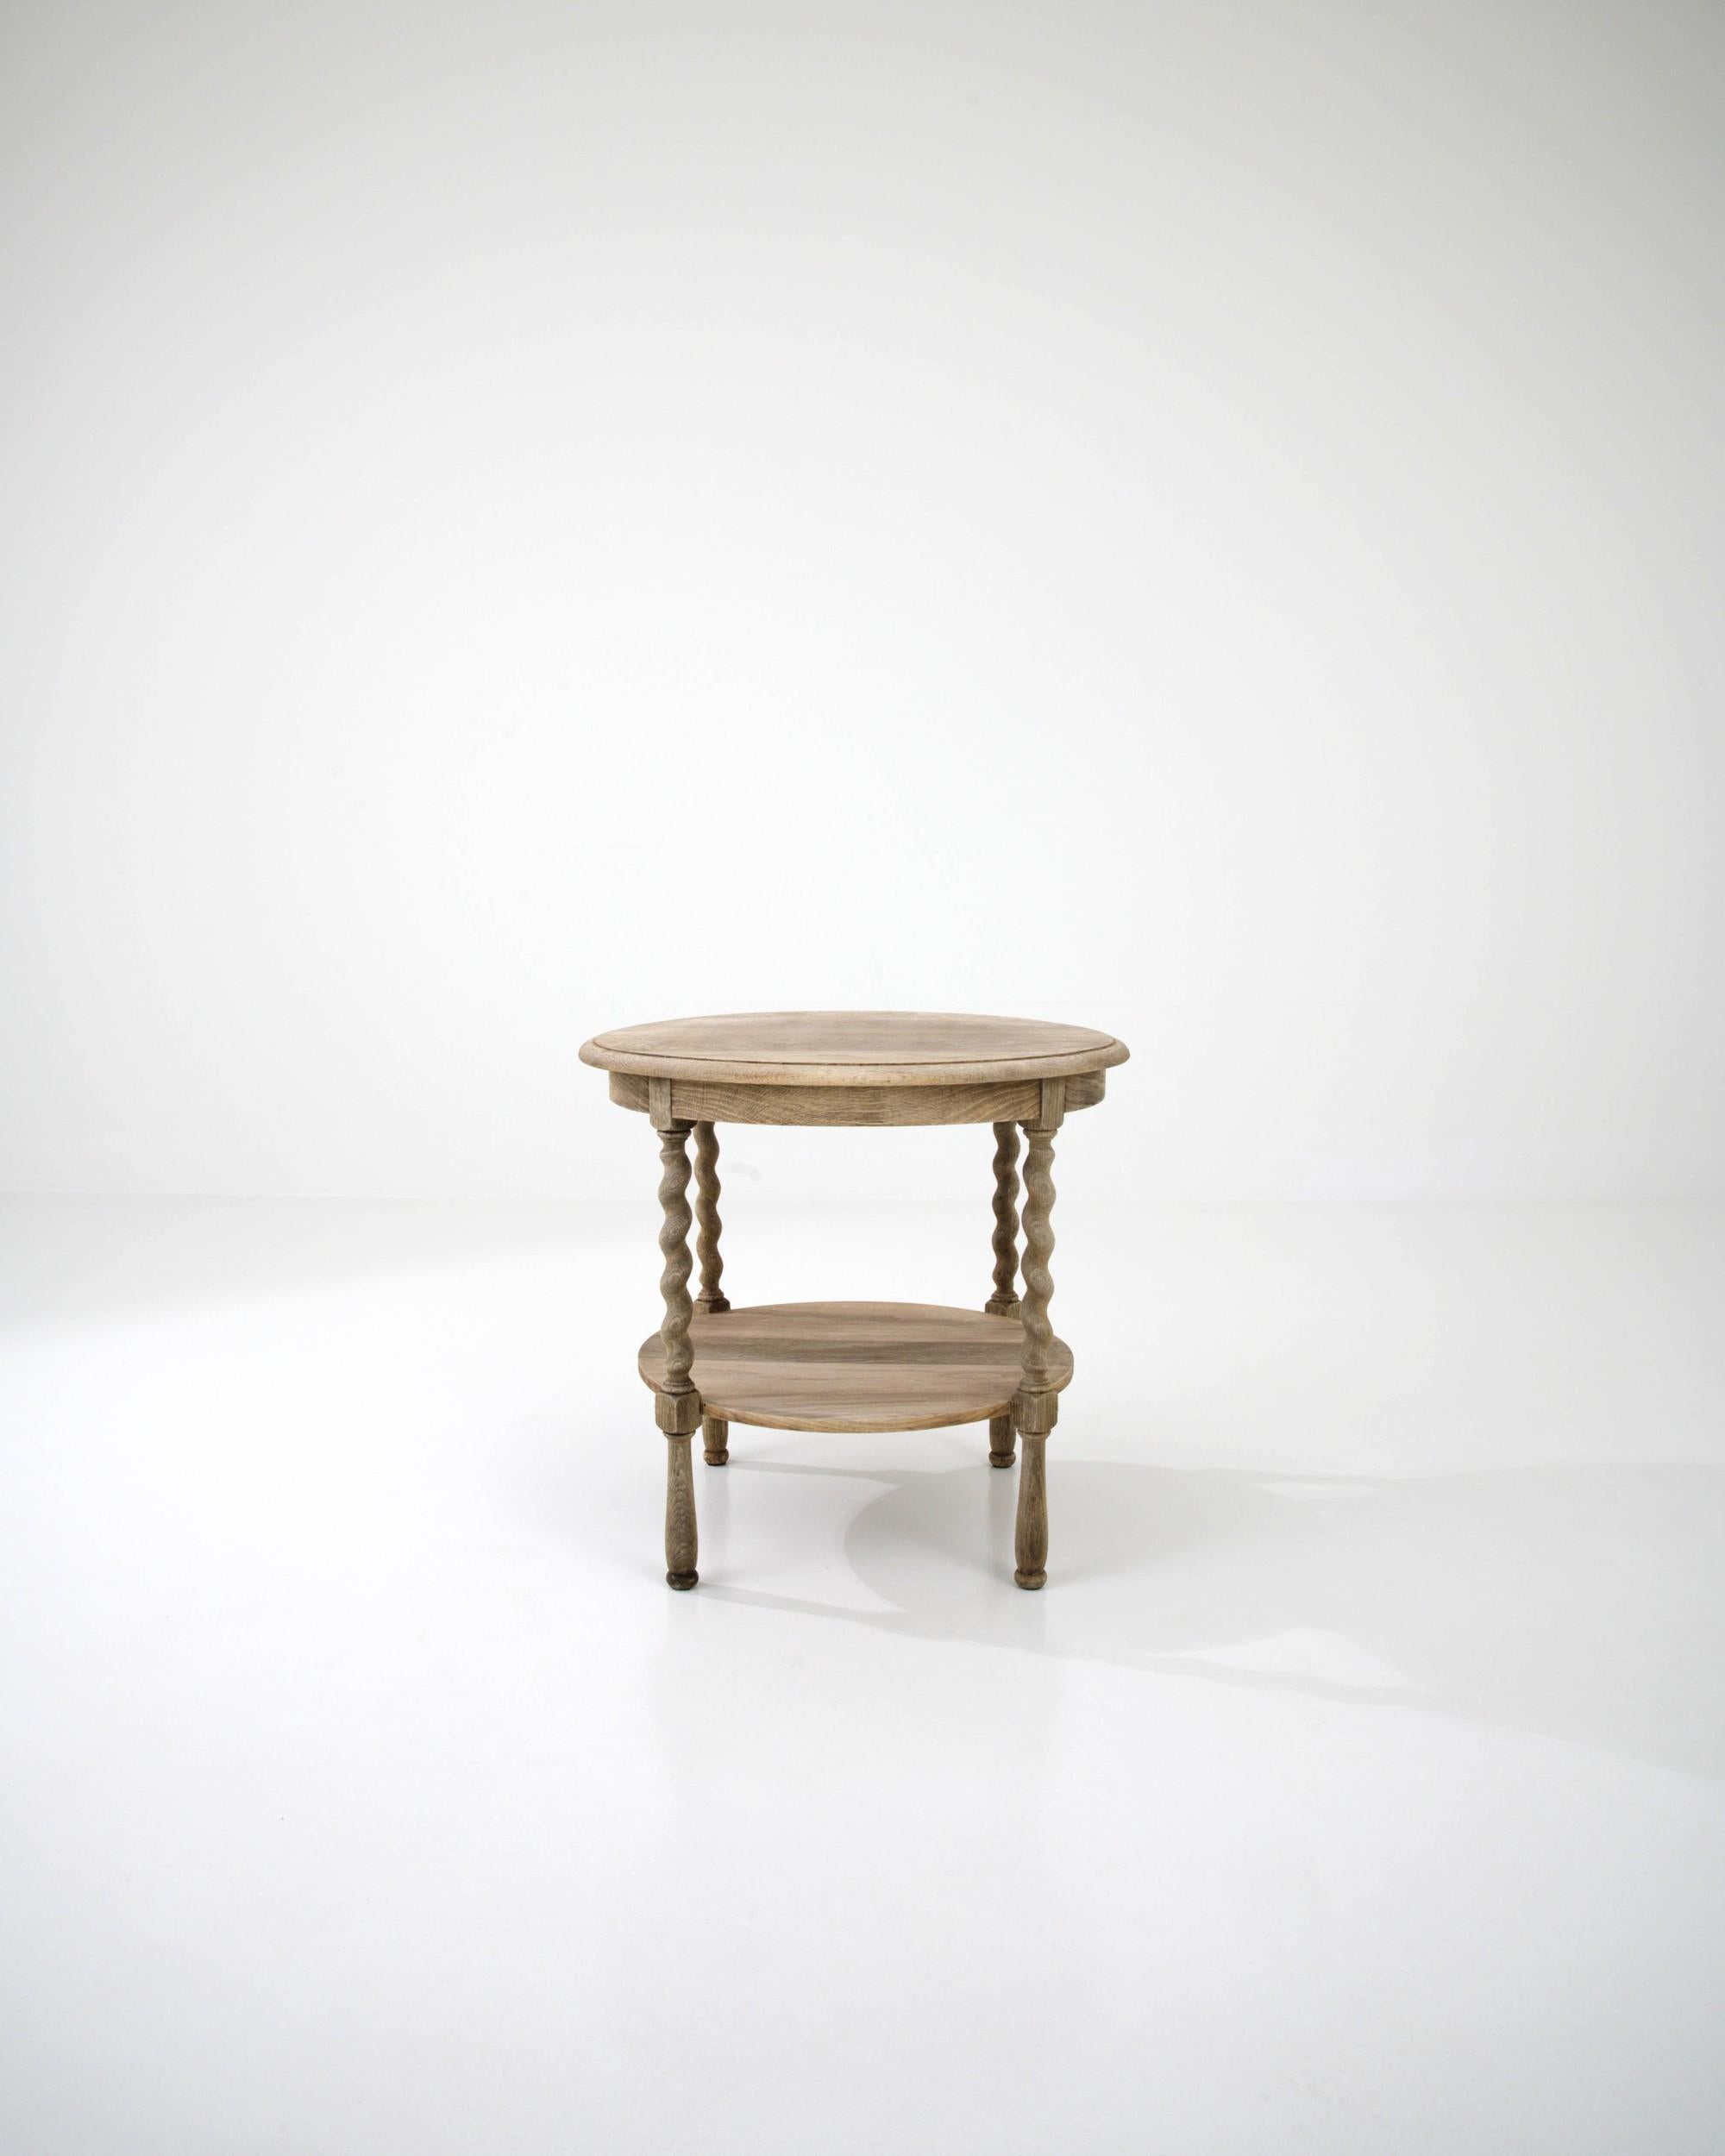 Made in Belgium in the 20th Century, this oak side table is defined by the shape of its round table top. The subtle organic feel of the ovoid top is enhanced by the table's finish and its barley twist legs. Natural oak has been enhanced with a